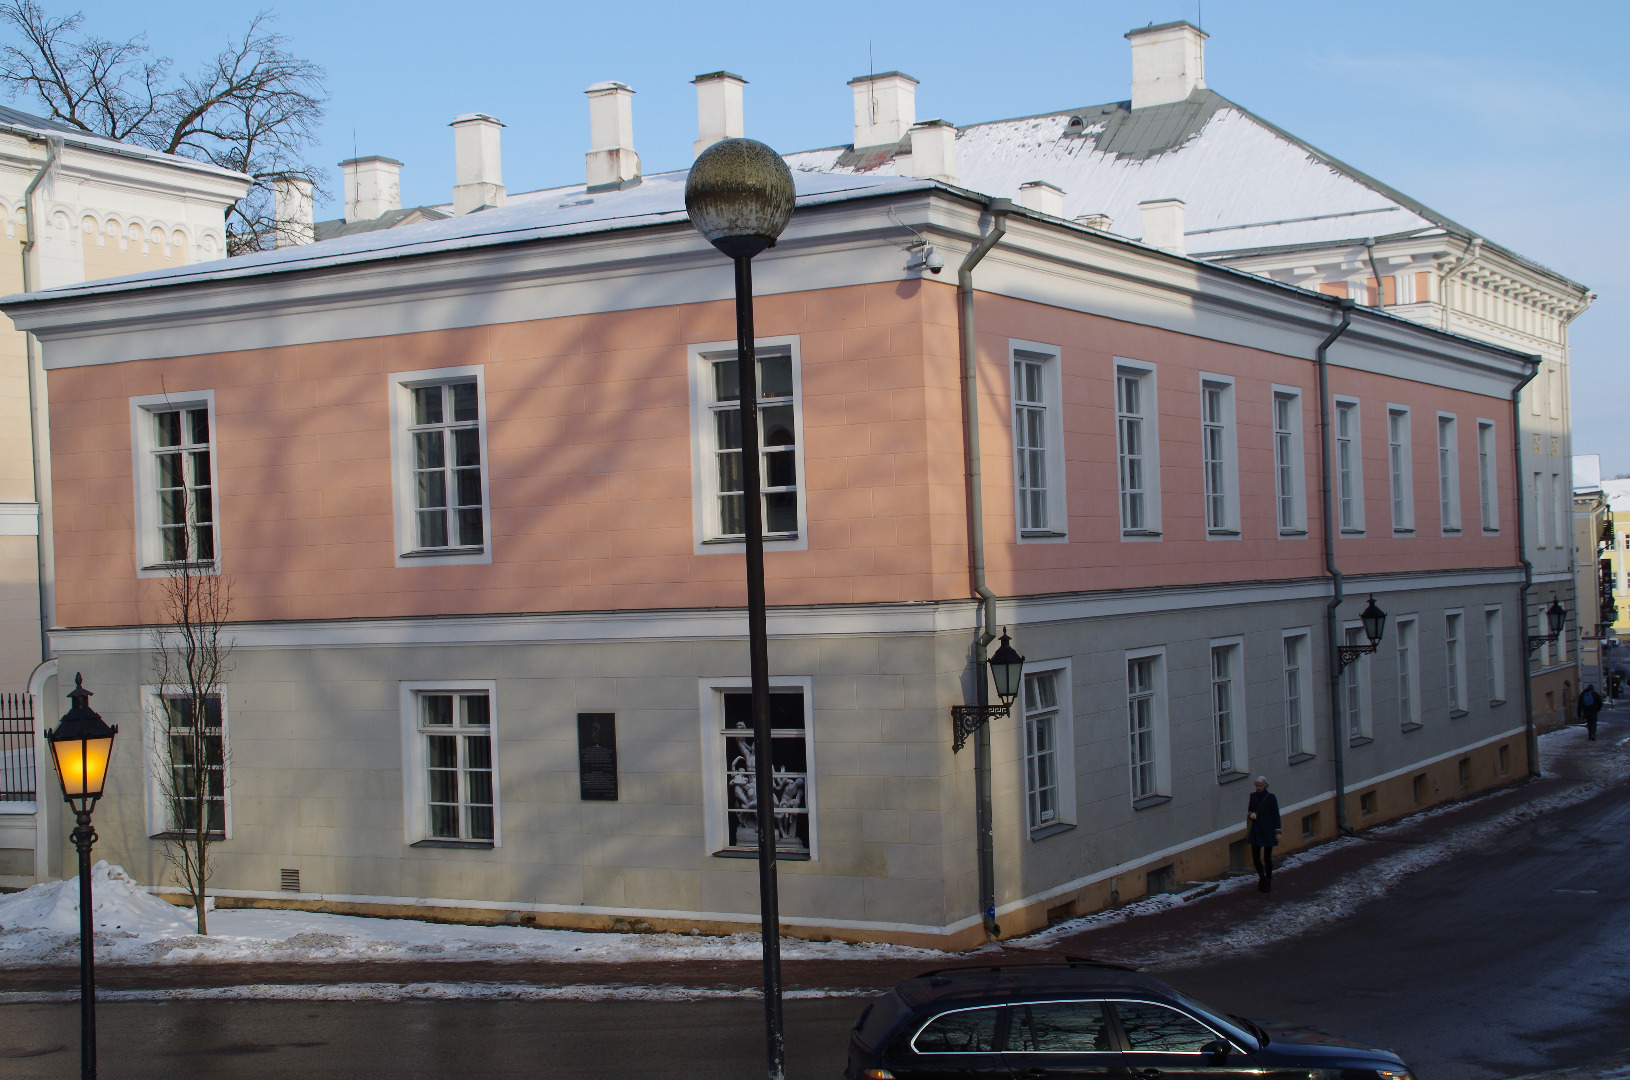 Tartu. Wing of the main building at the University of Tartu. During the 19th and 20th centuries rephoto